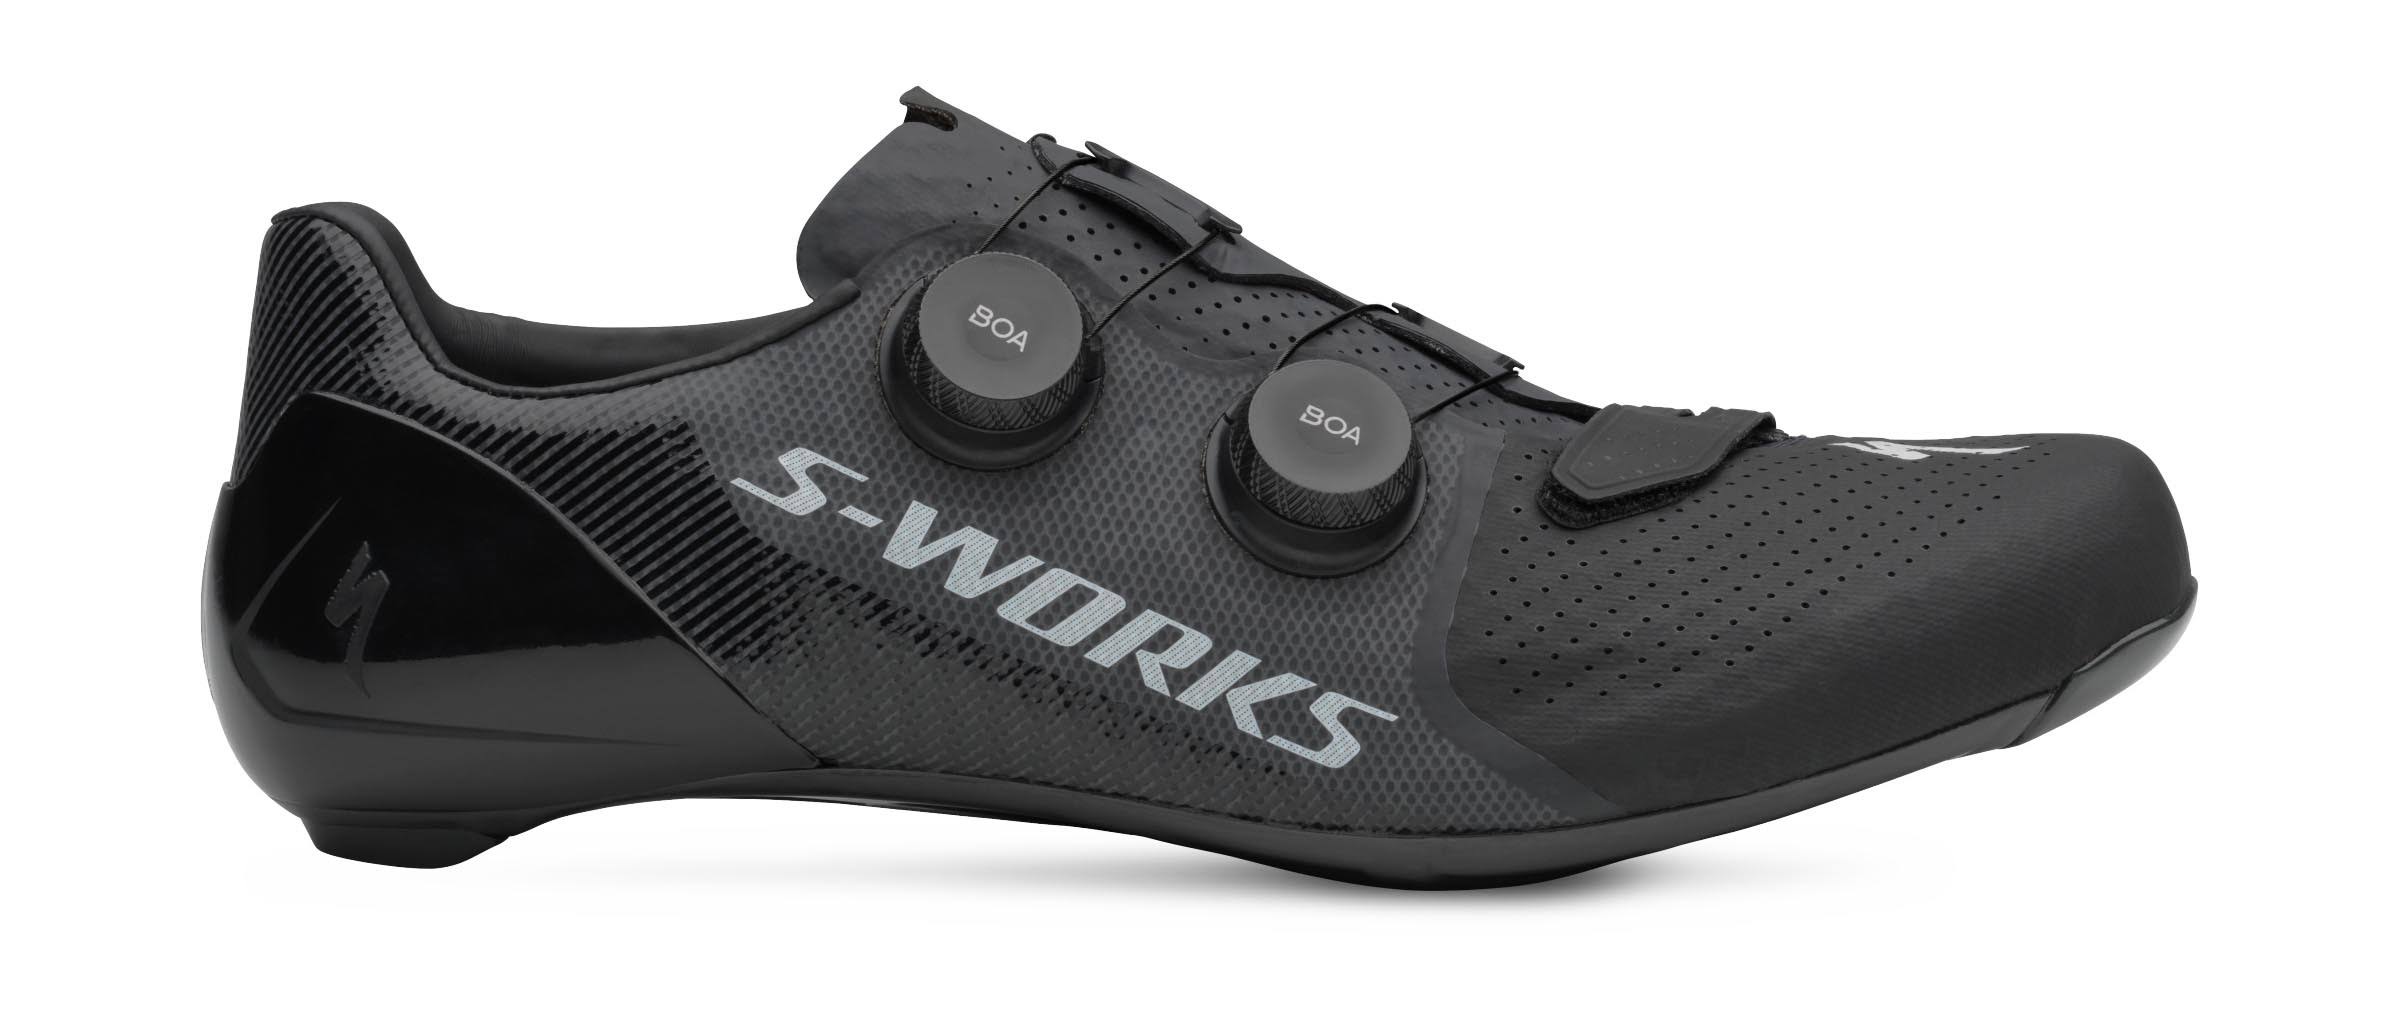 Specialized S-Works 7 Road Shoes - Black